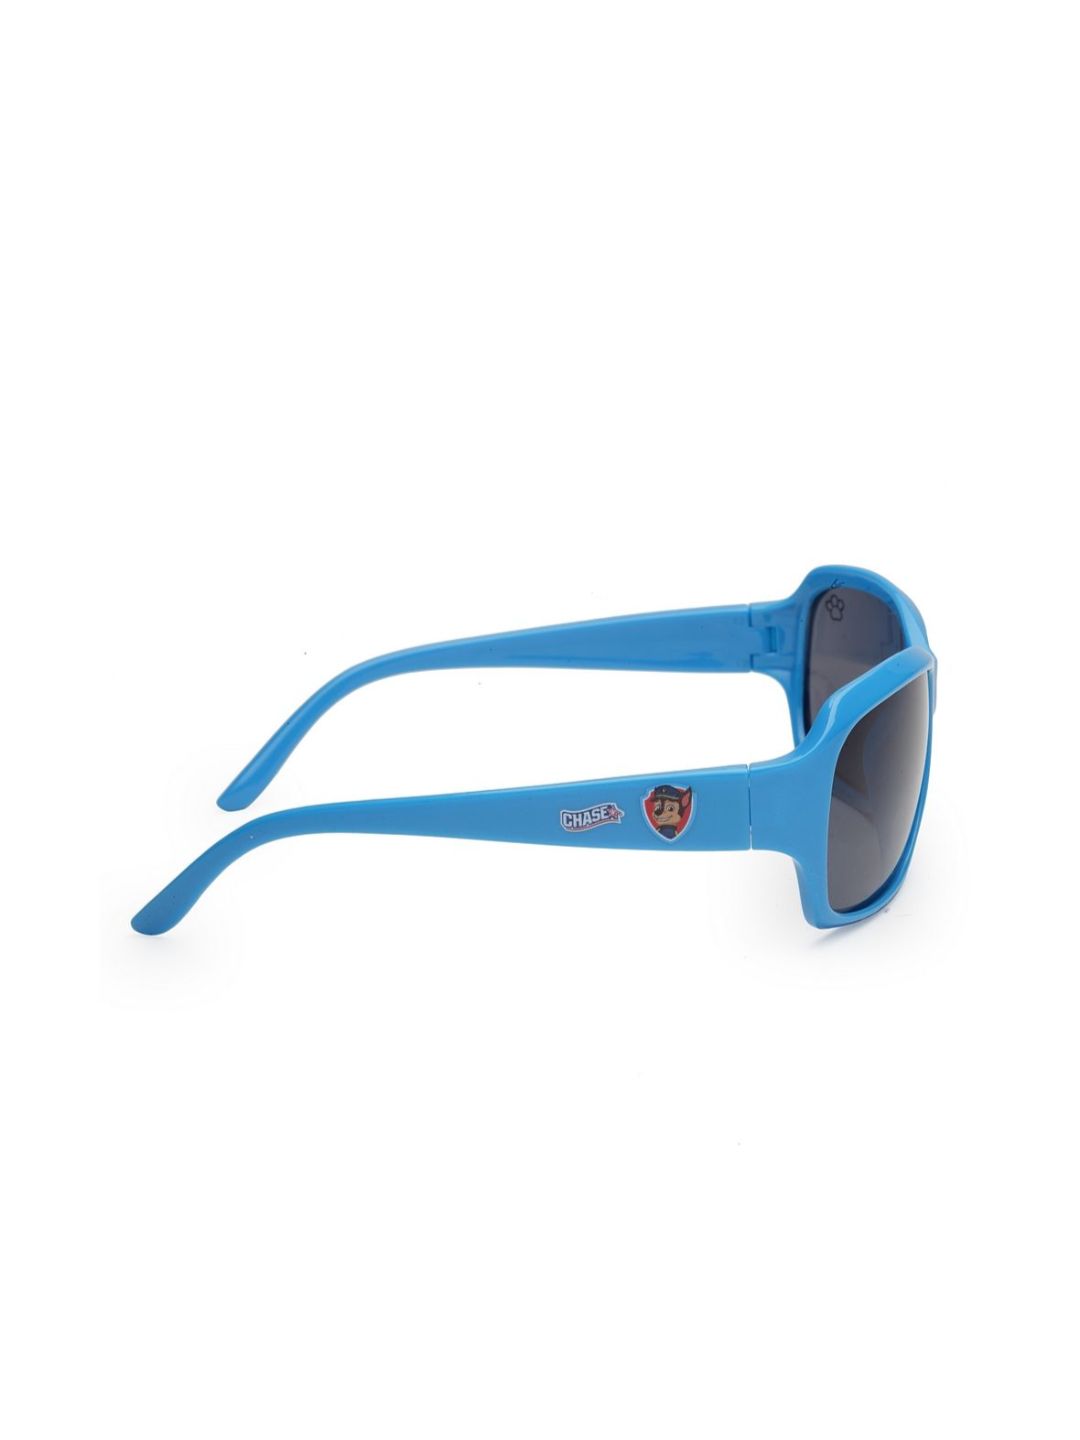 Stol'n Kids Yellow and Blue Bow Applique Rectangular Sunglasses:Yellow and Blue Green and Pink